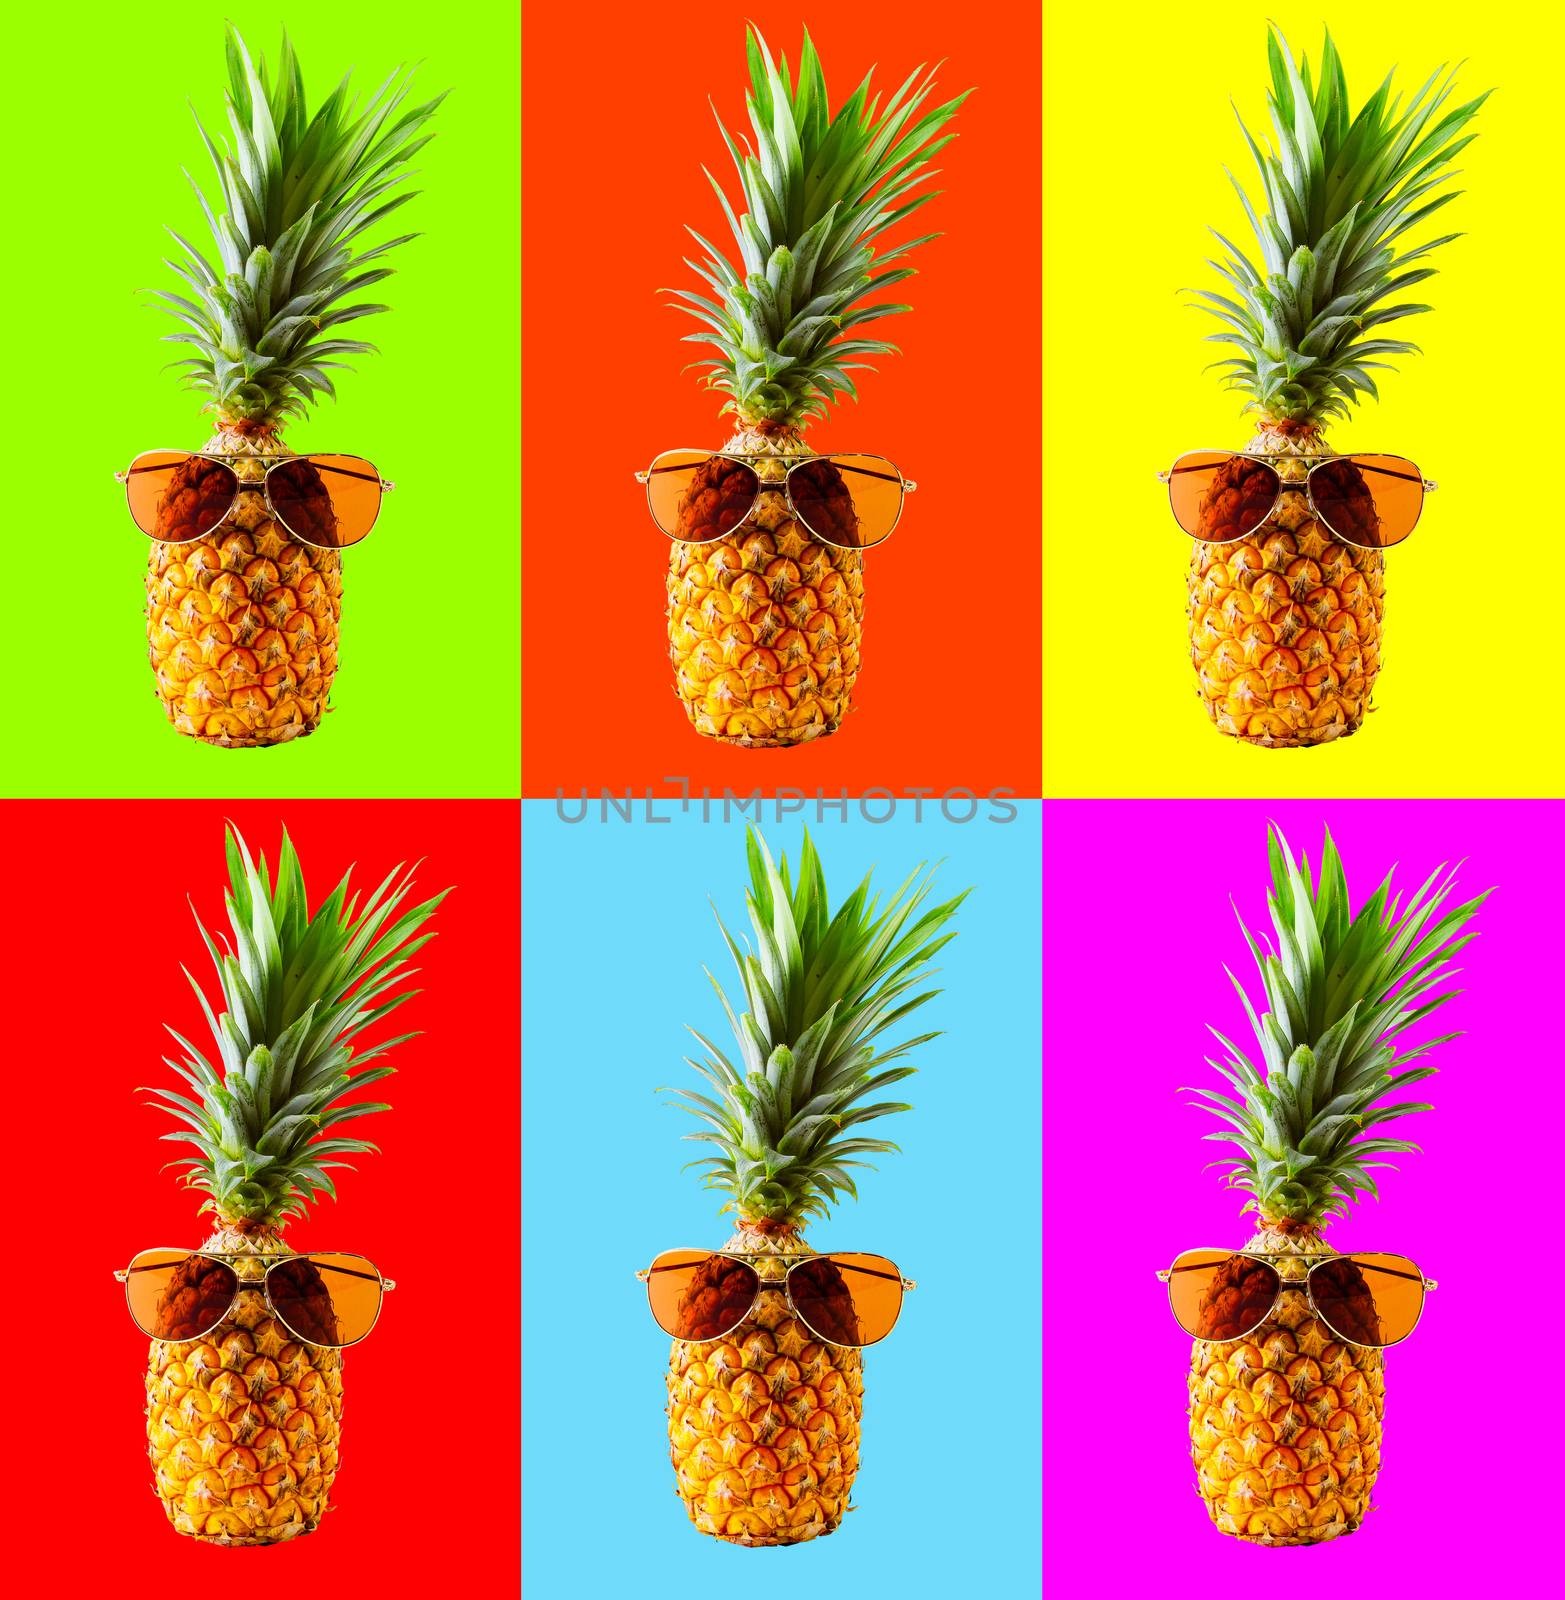 Retro design tropical style concept.Pattern with hipster pineapple summer decoration background